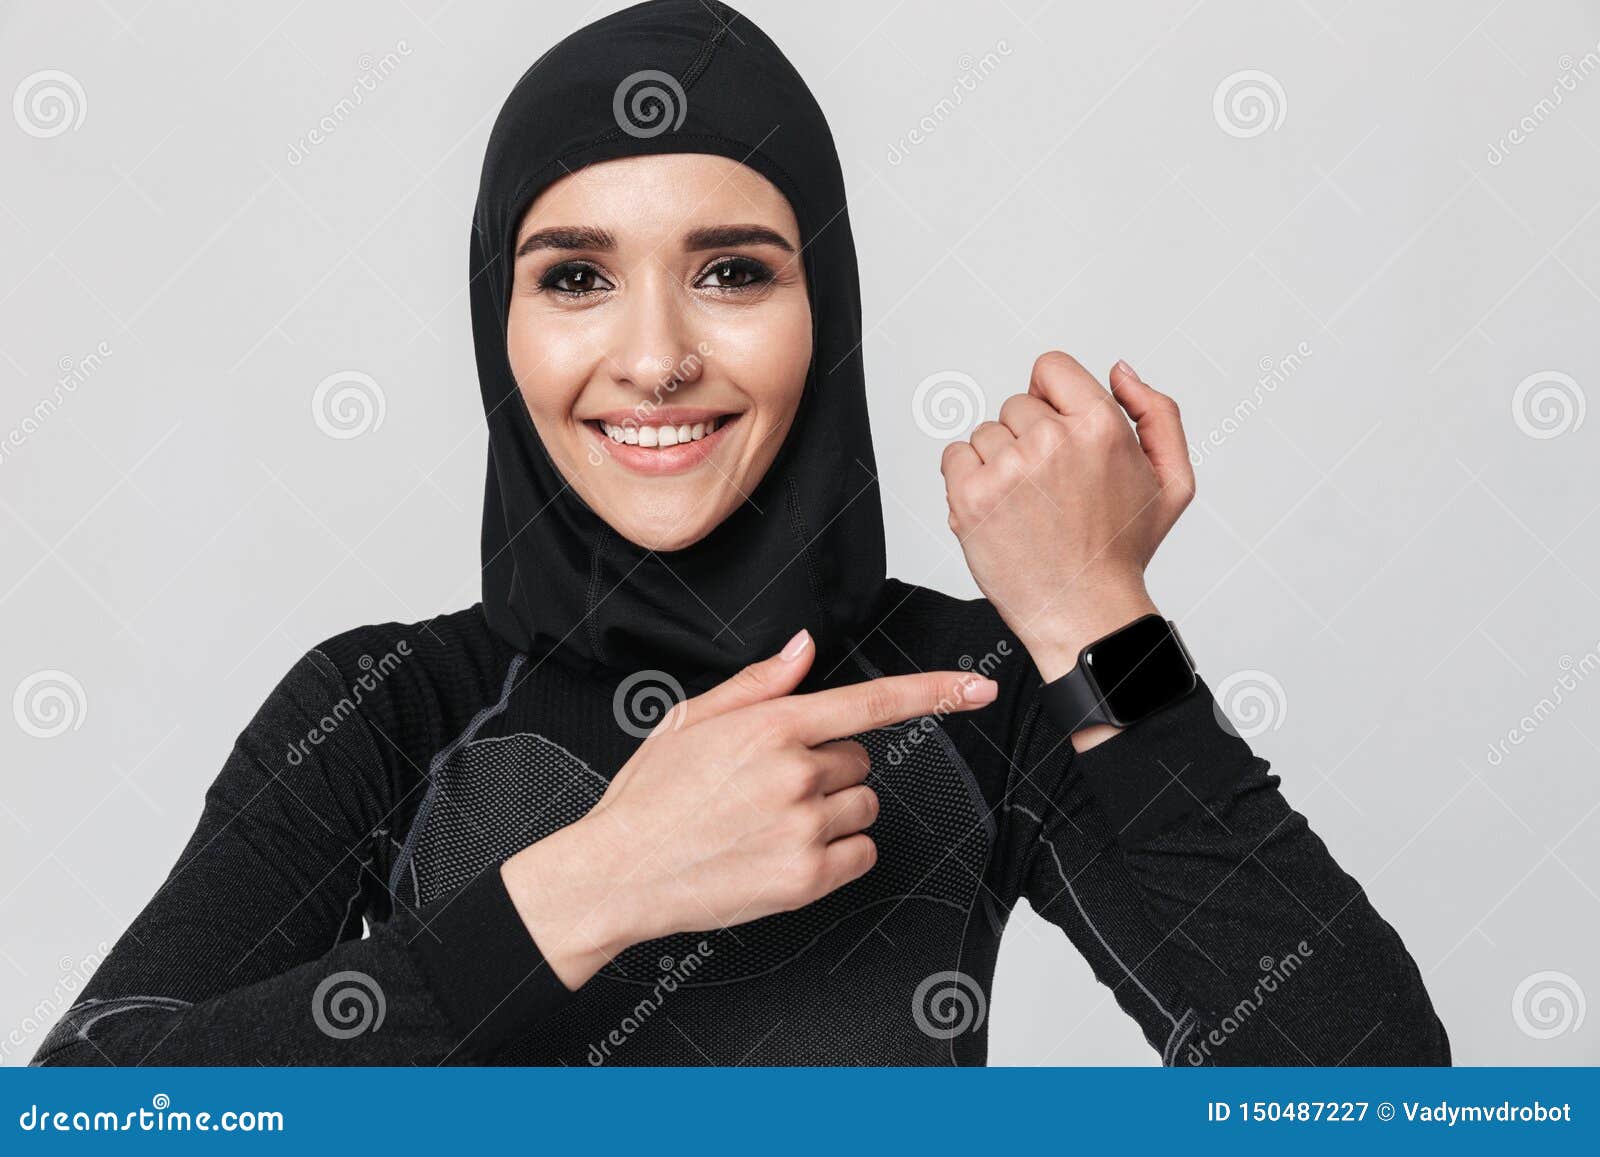 Young Woman Fitness Muslim Using Watch Clock Isolated Over White Wall